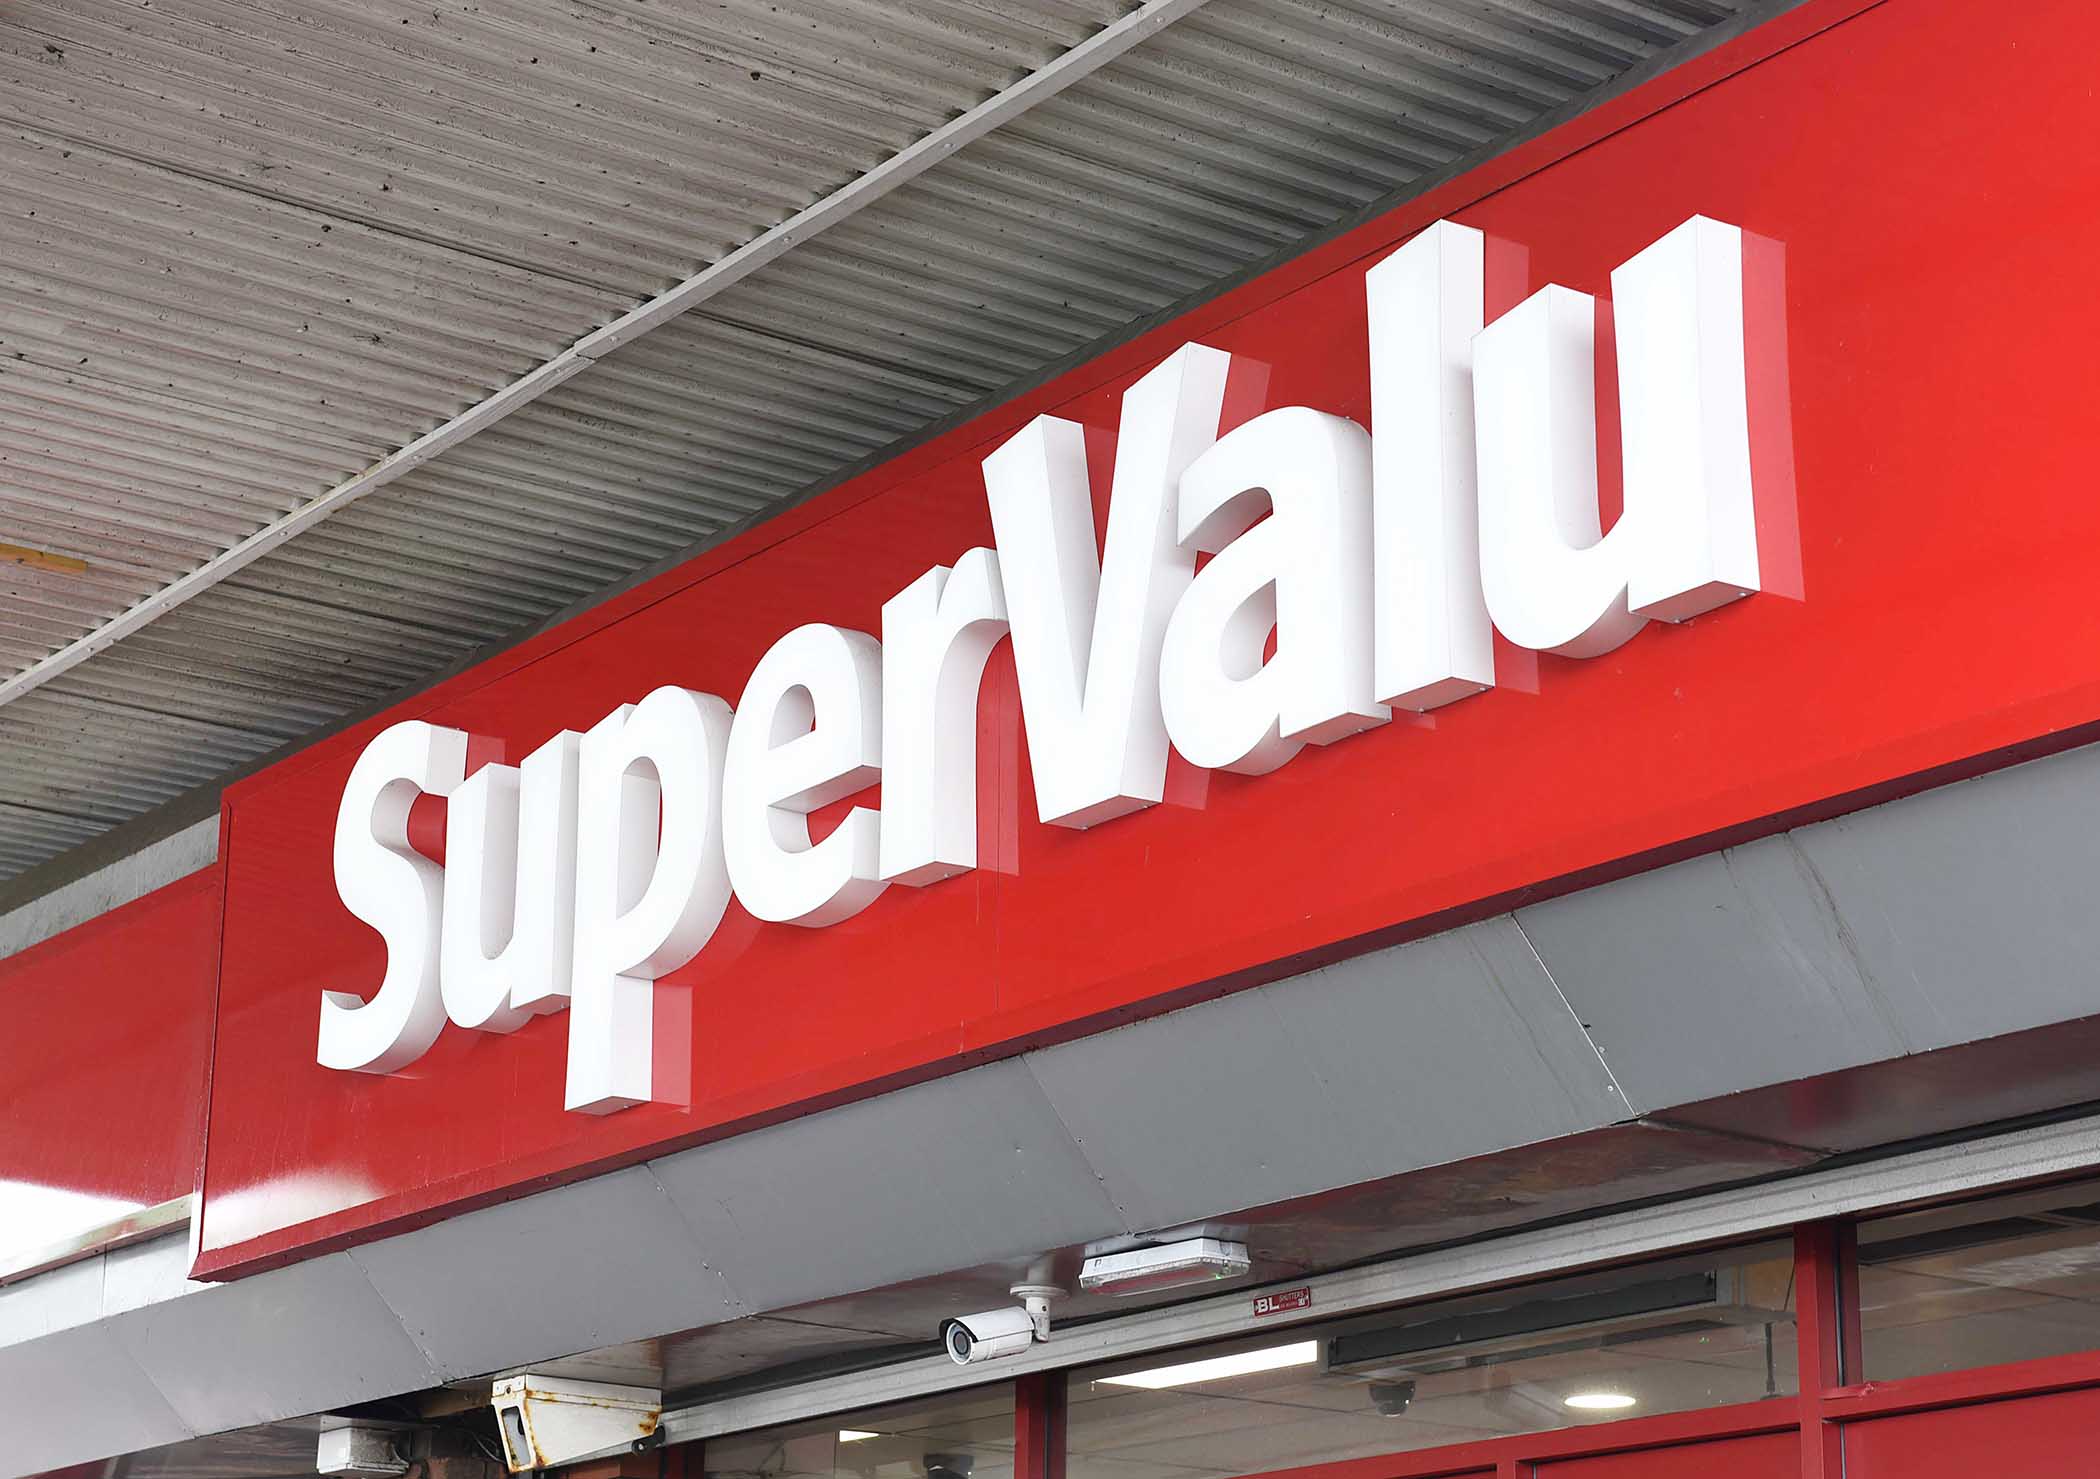 SuperValu takes the top spot as Ireland’s fastest growing retailer